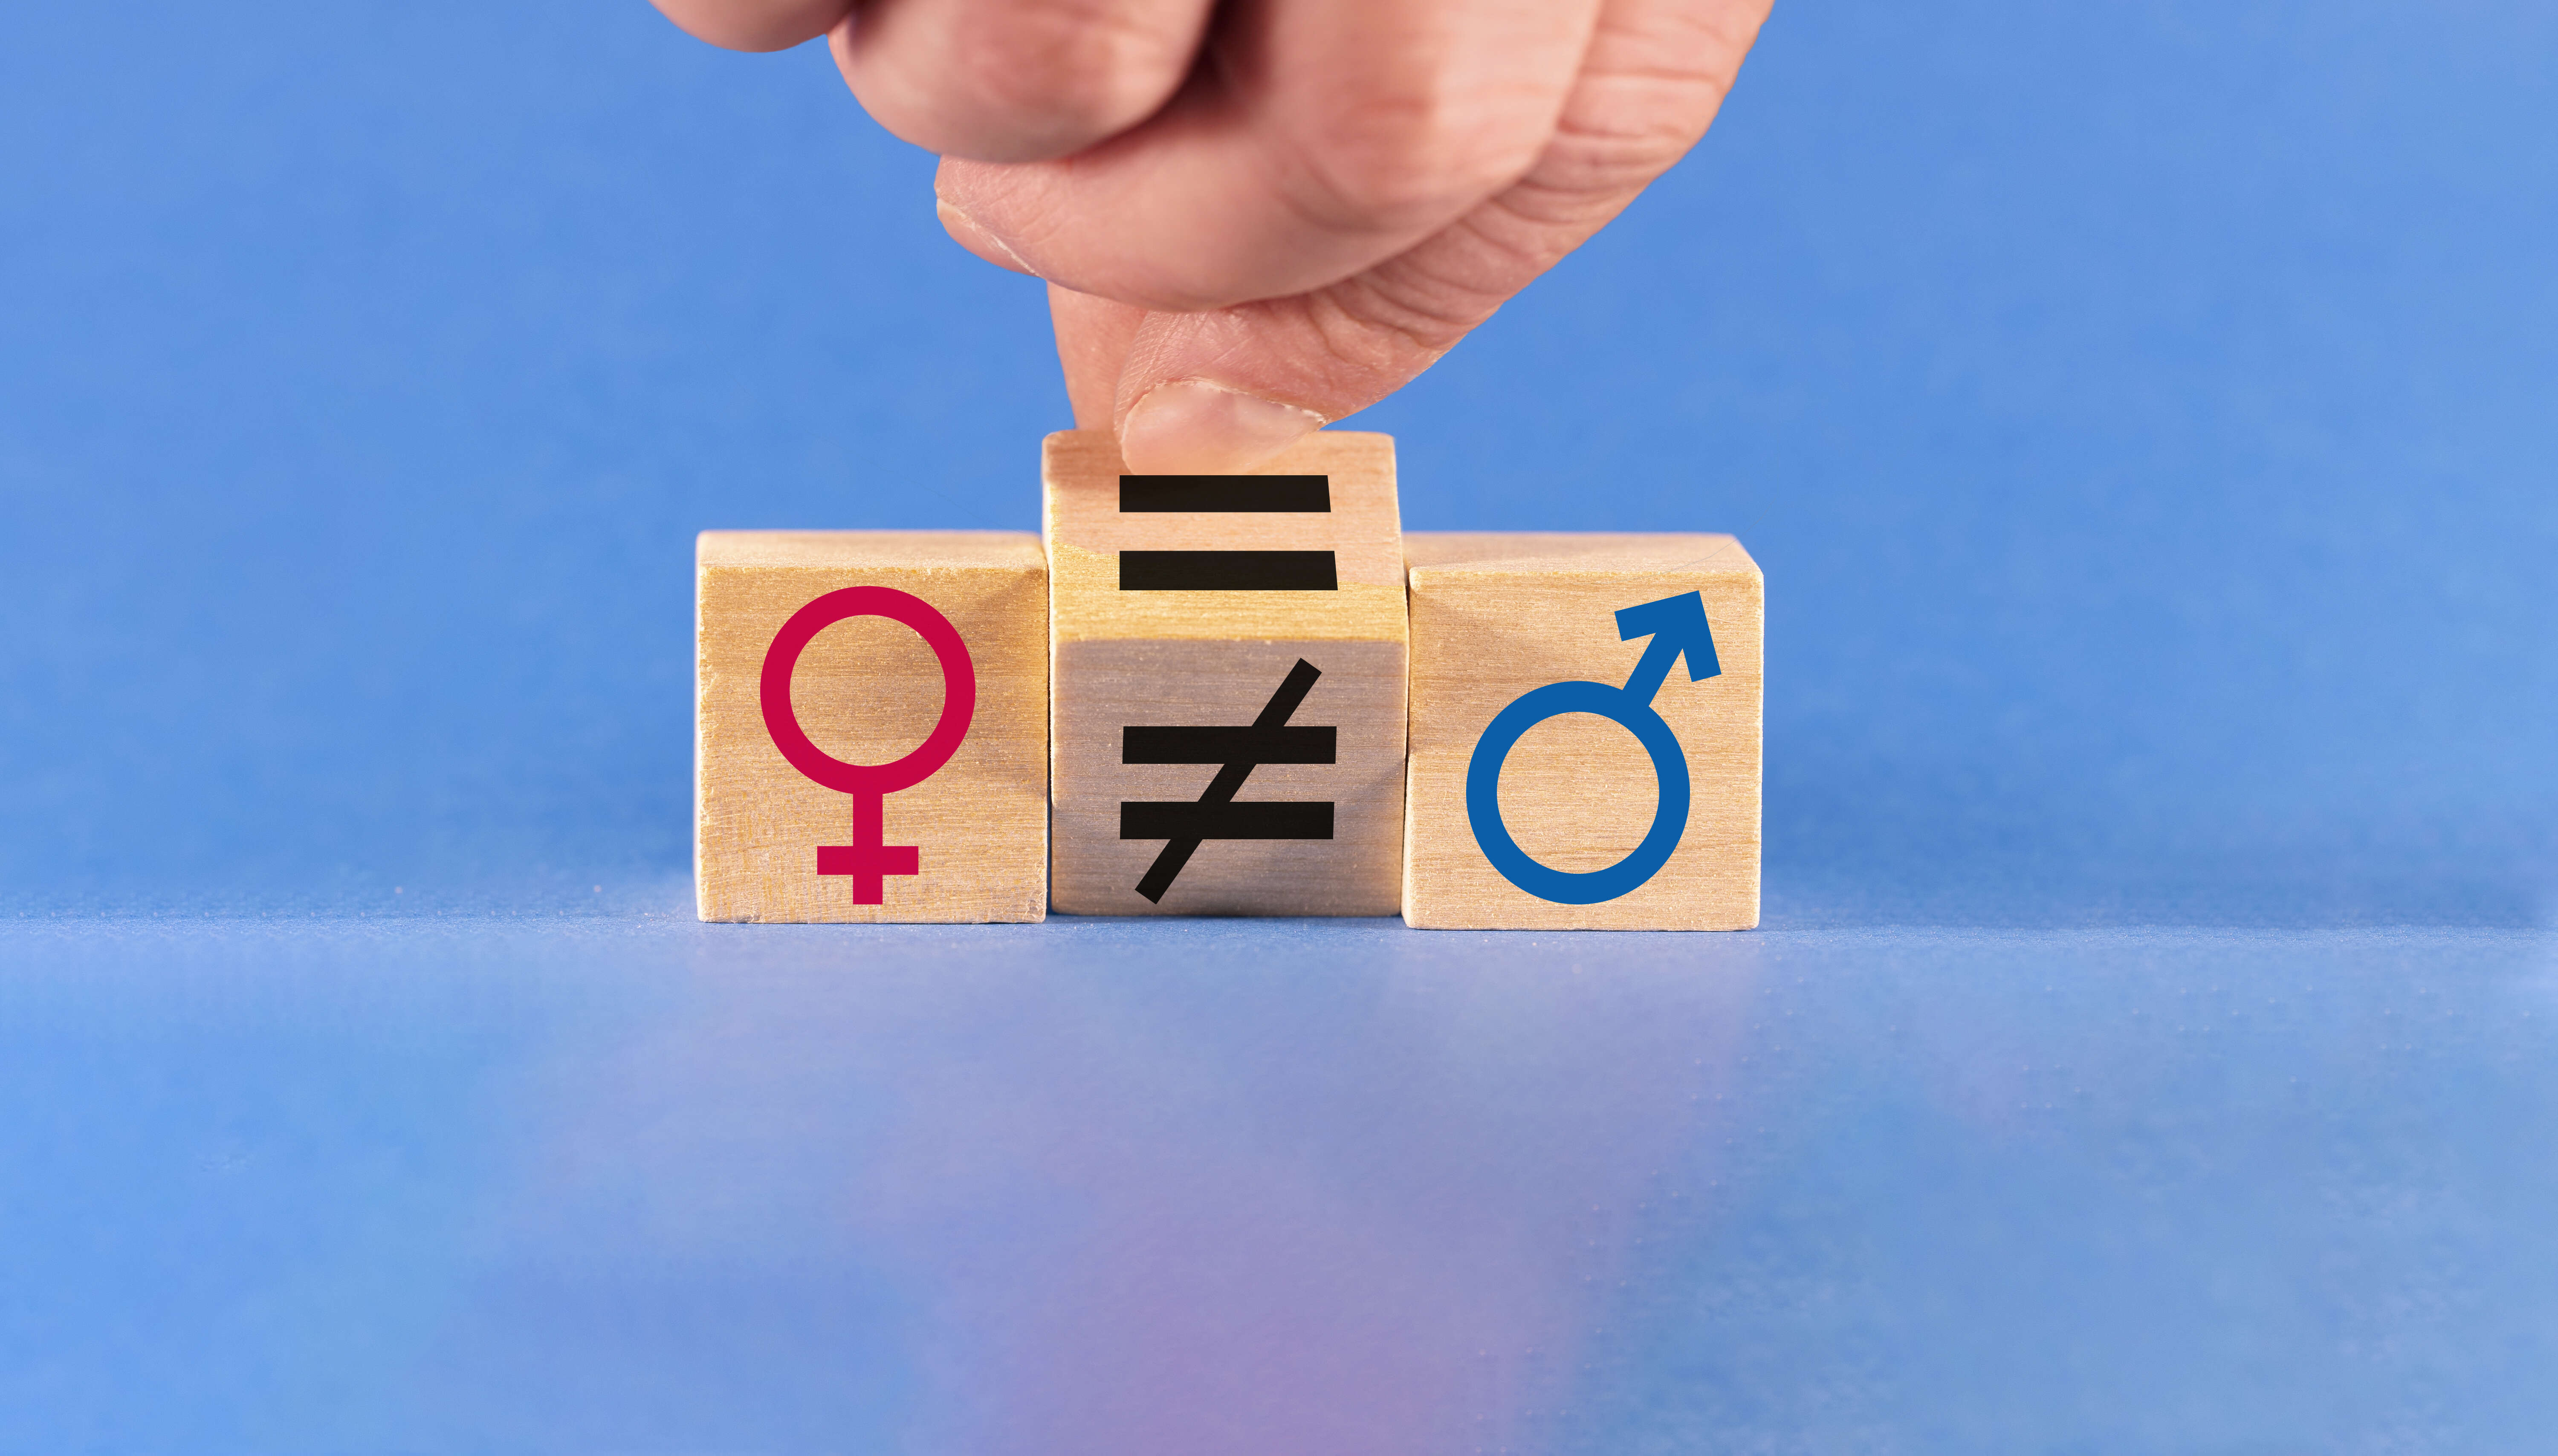 A hand turns a wooden die to change an unequal sign to an equal sign between male and female symbols on a blue background.